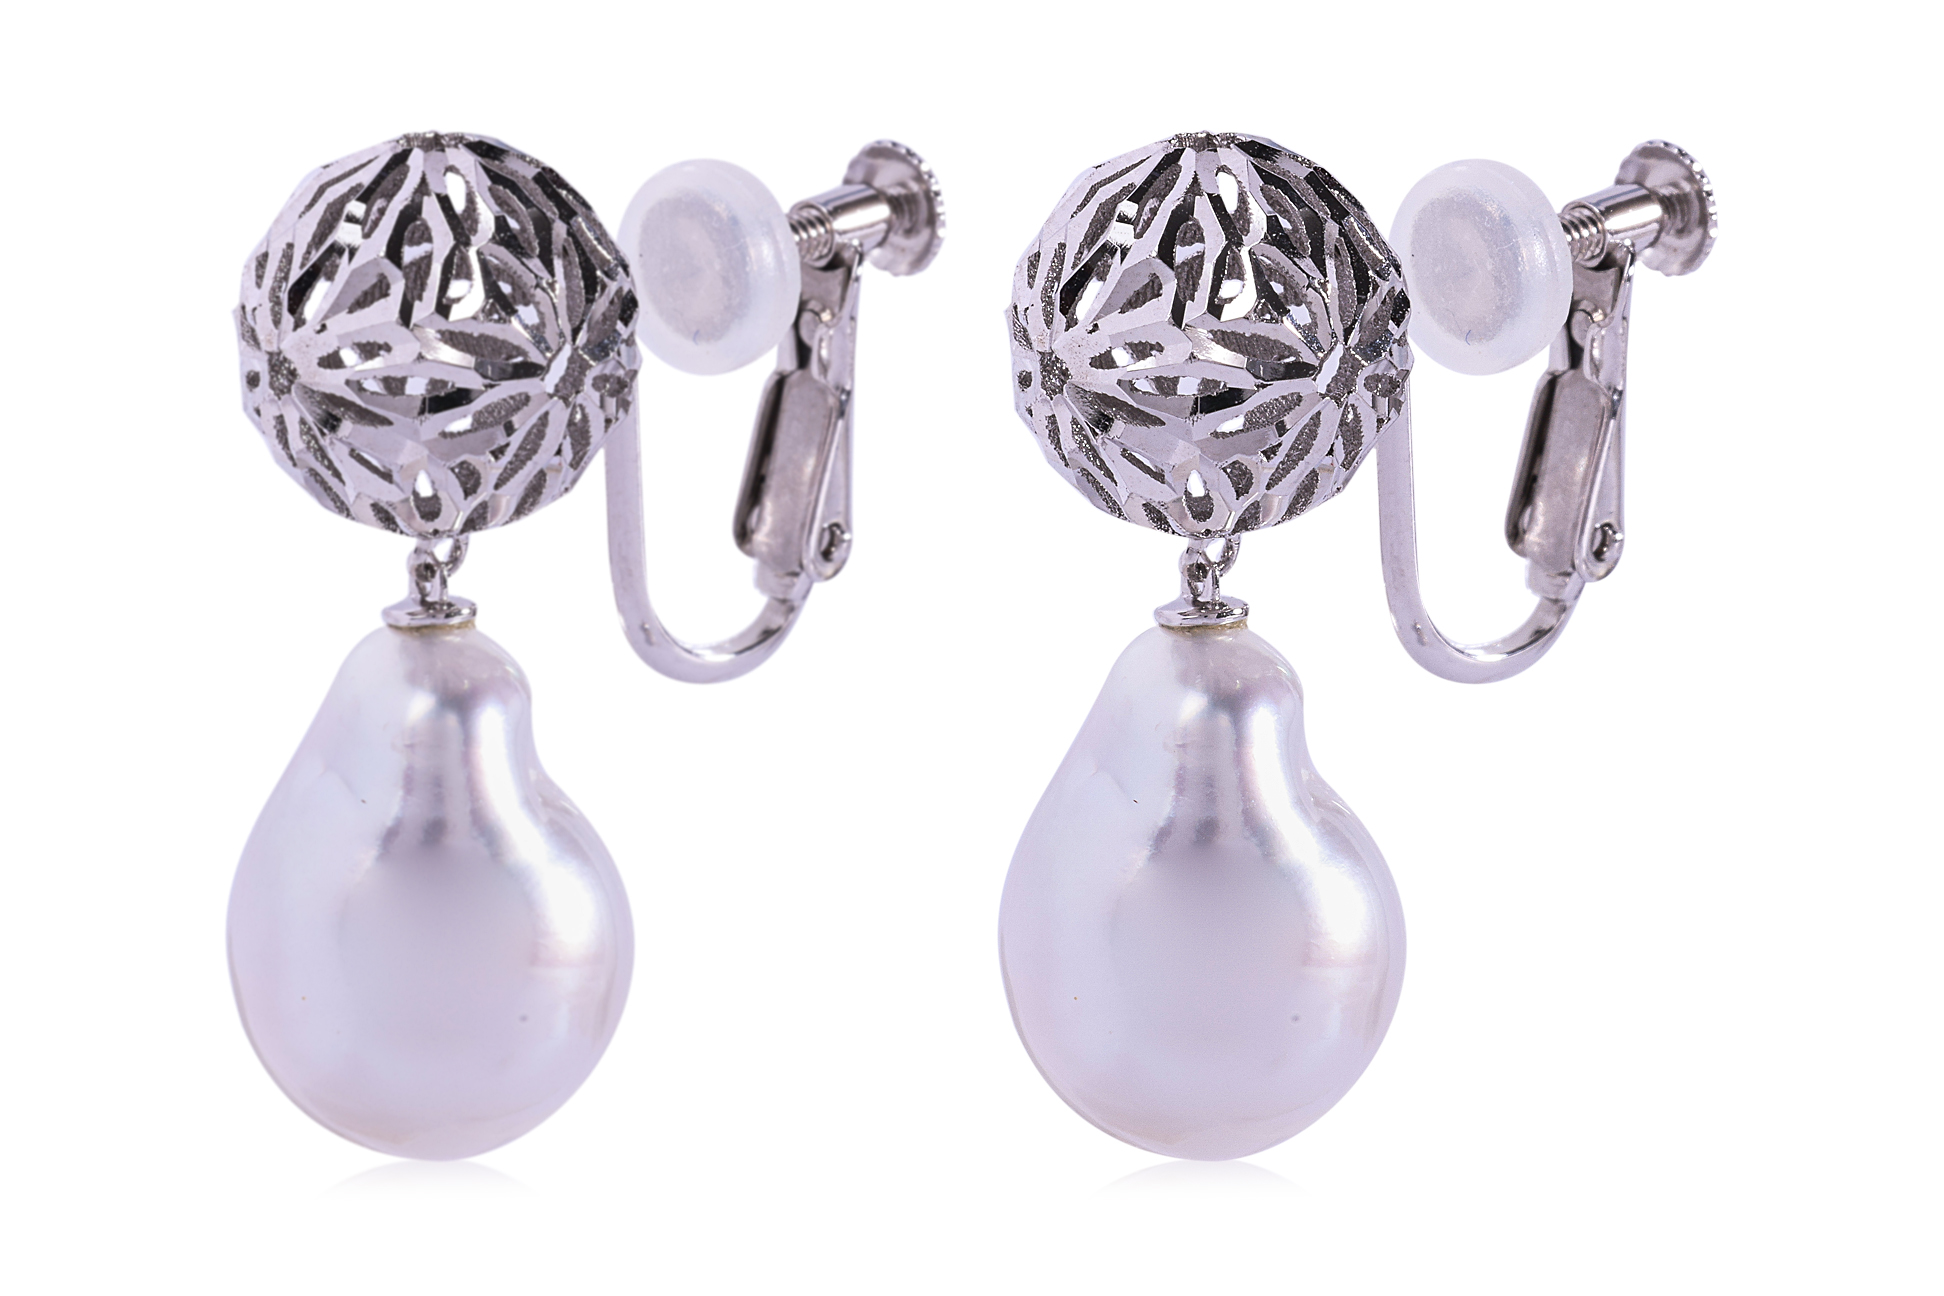 A PAIR OF LATTICE BALL AND CULTURED BAROQUE PEARL EARRINGS - Image 2 of 3